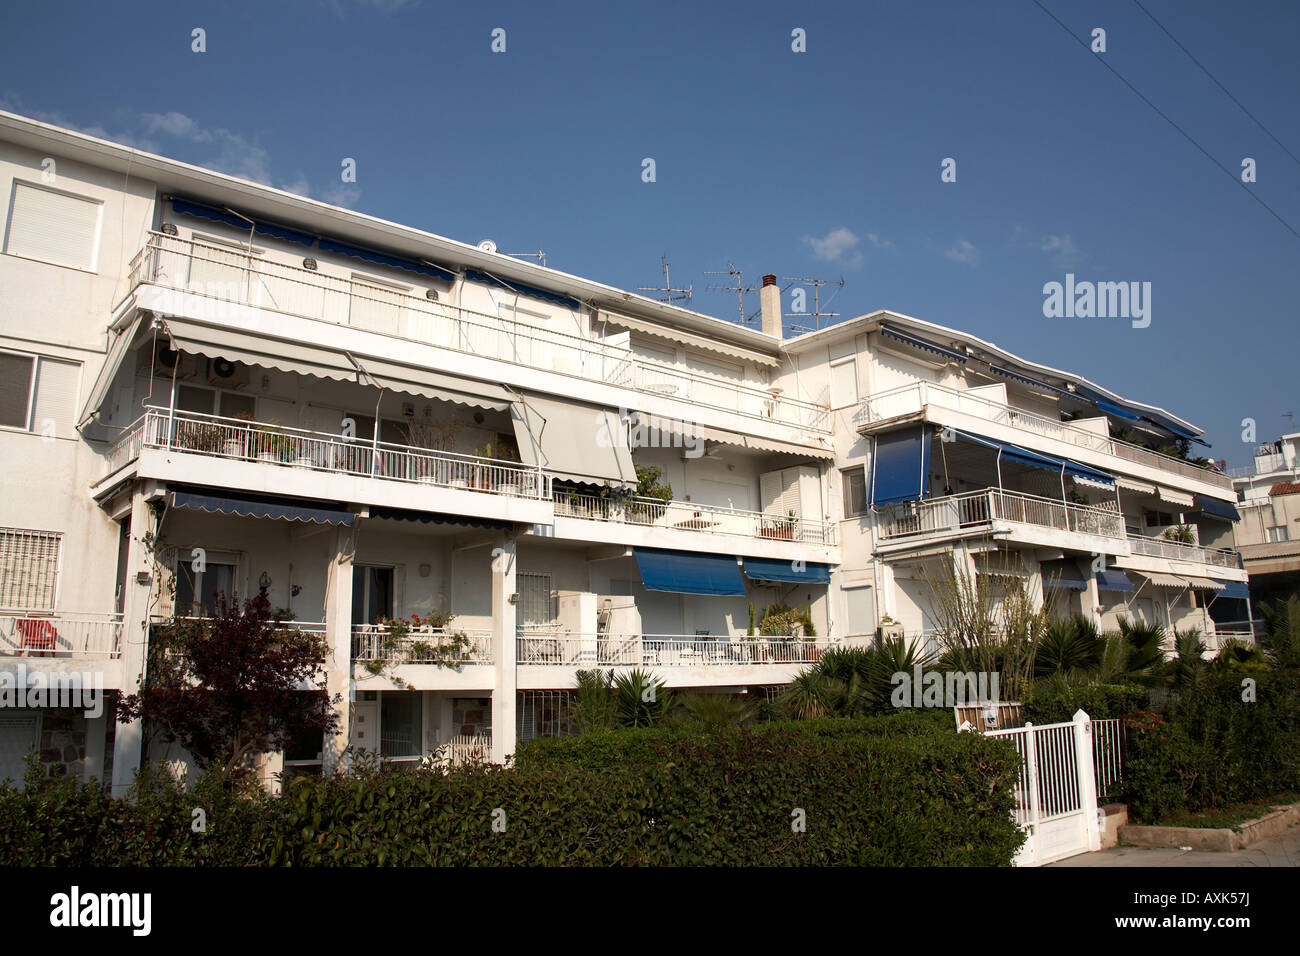 Blocks of flats with balconies and blinds in Glifada Attica or Atiki Greece Stock Photo